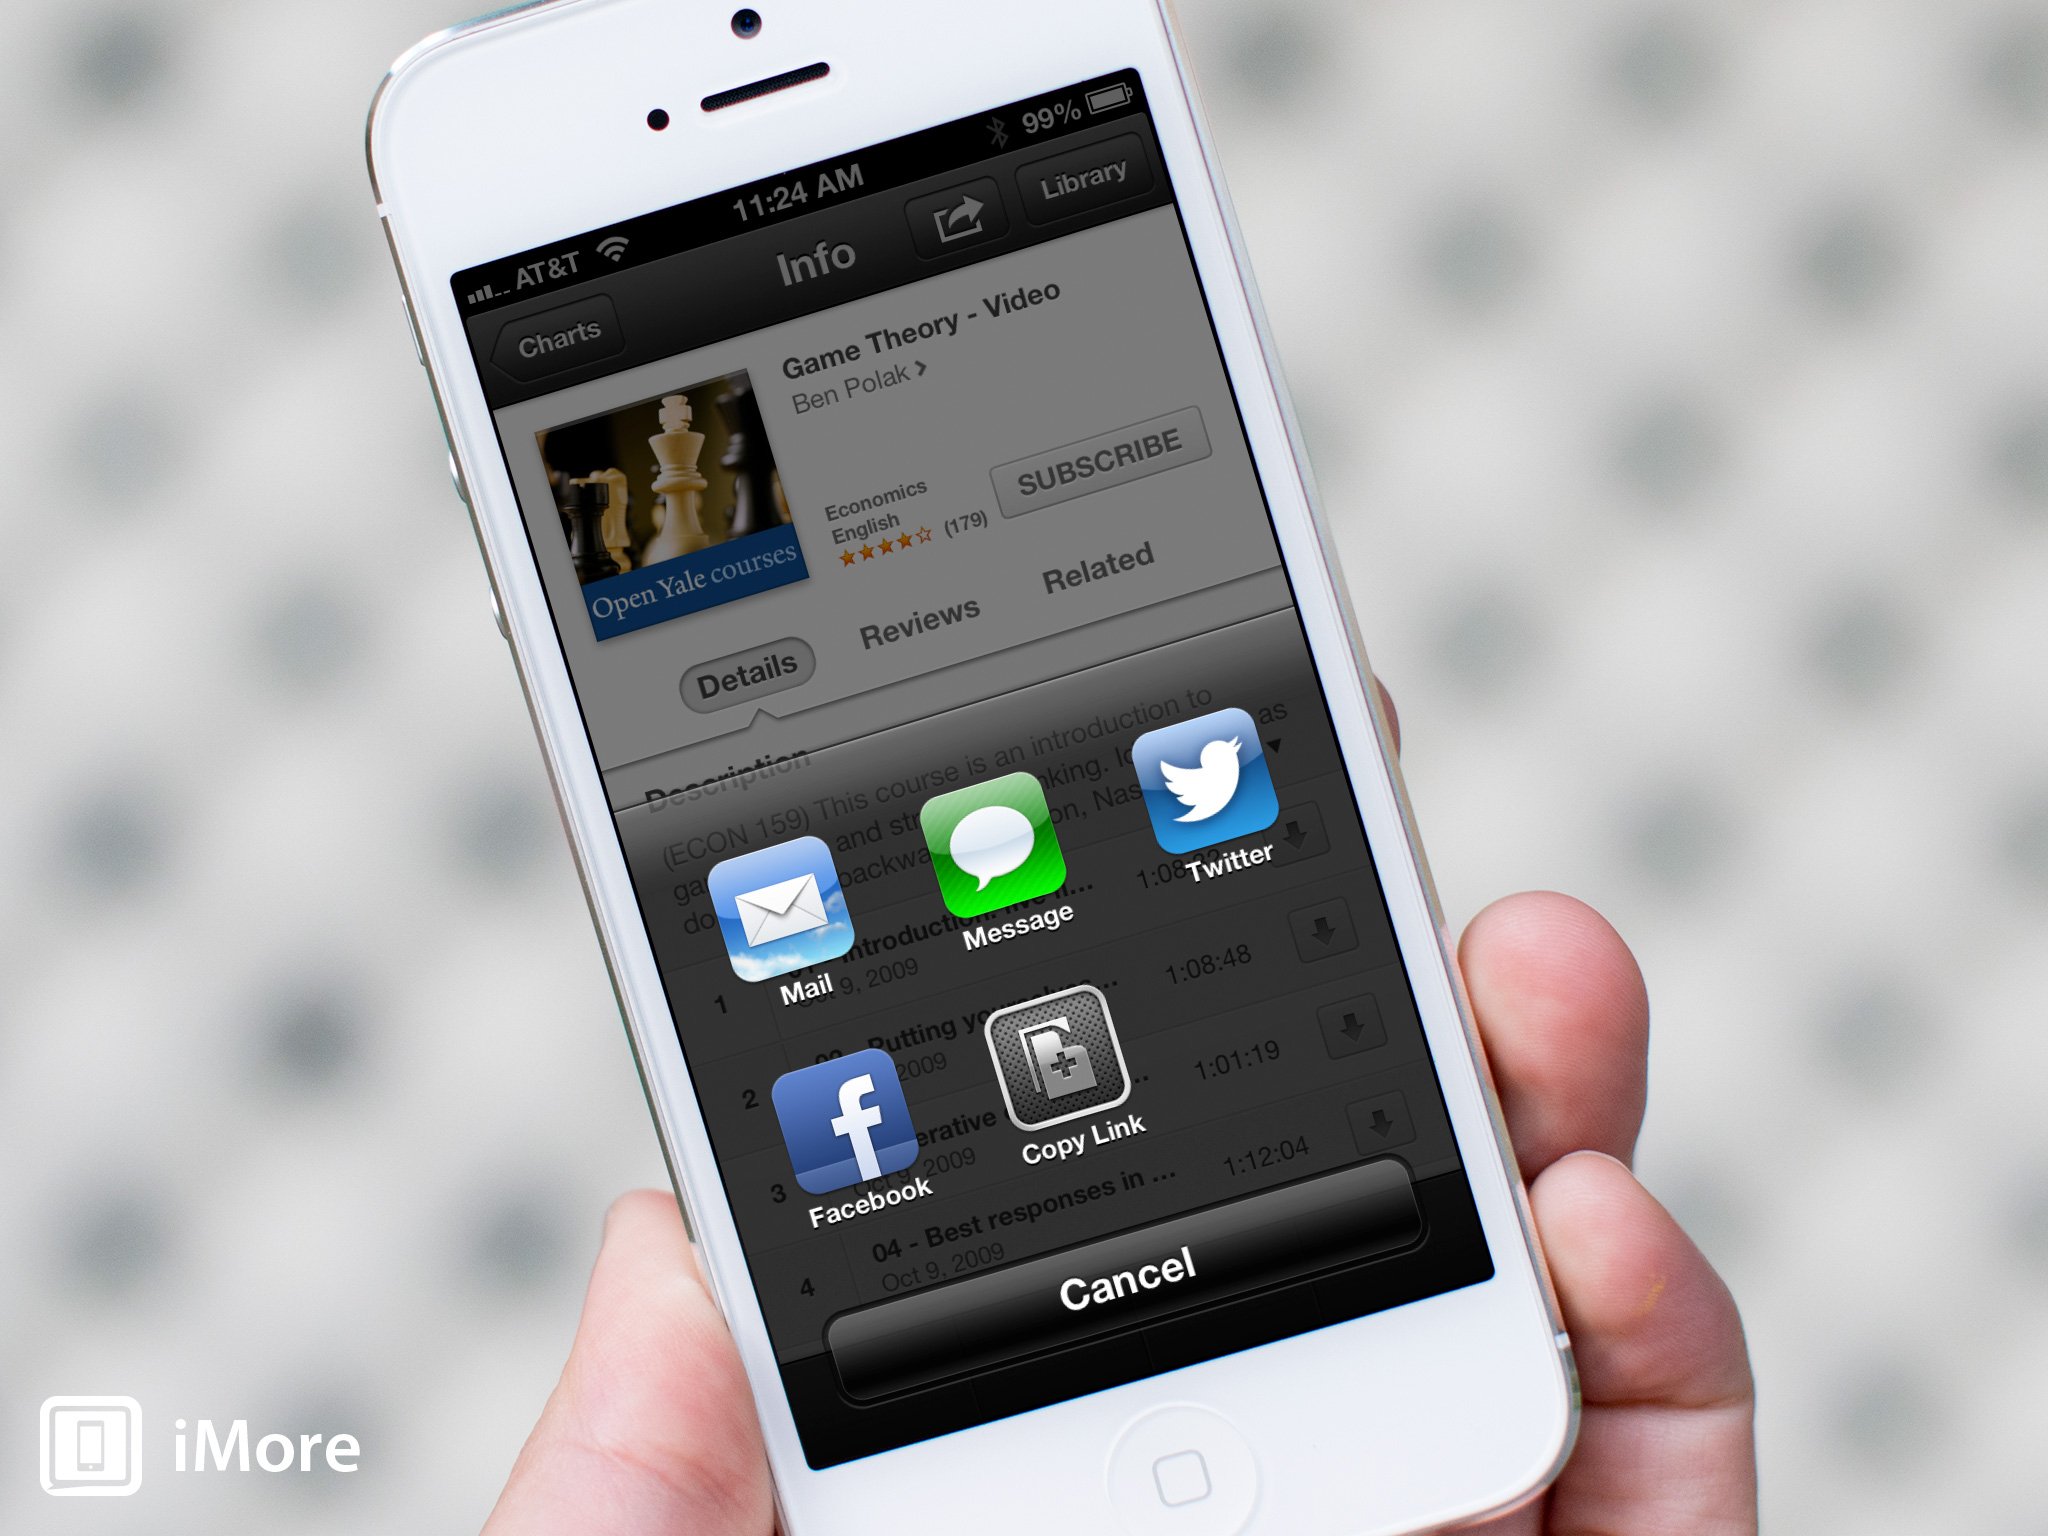 How to share a course with iTunes U for iPhone and iPad